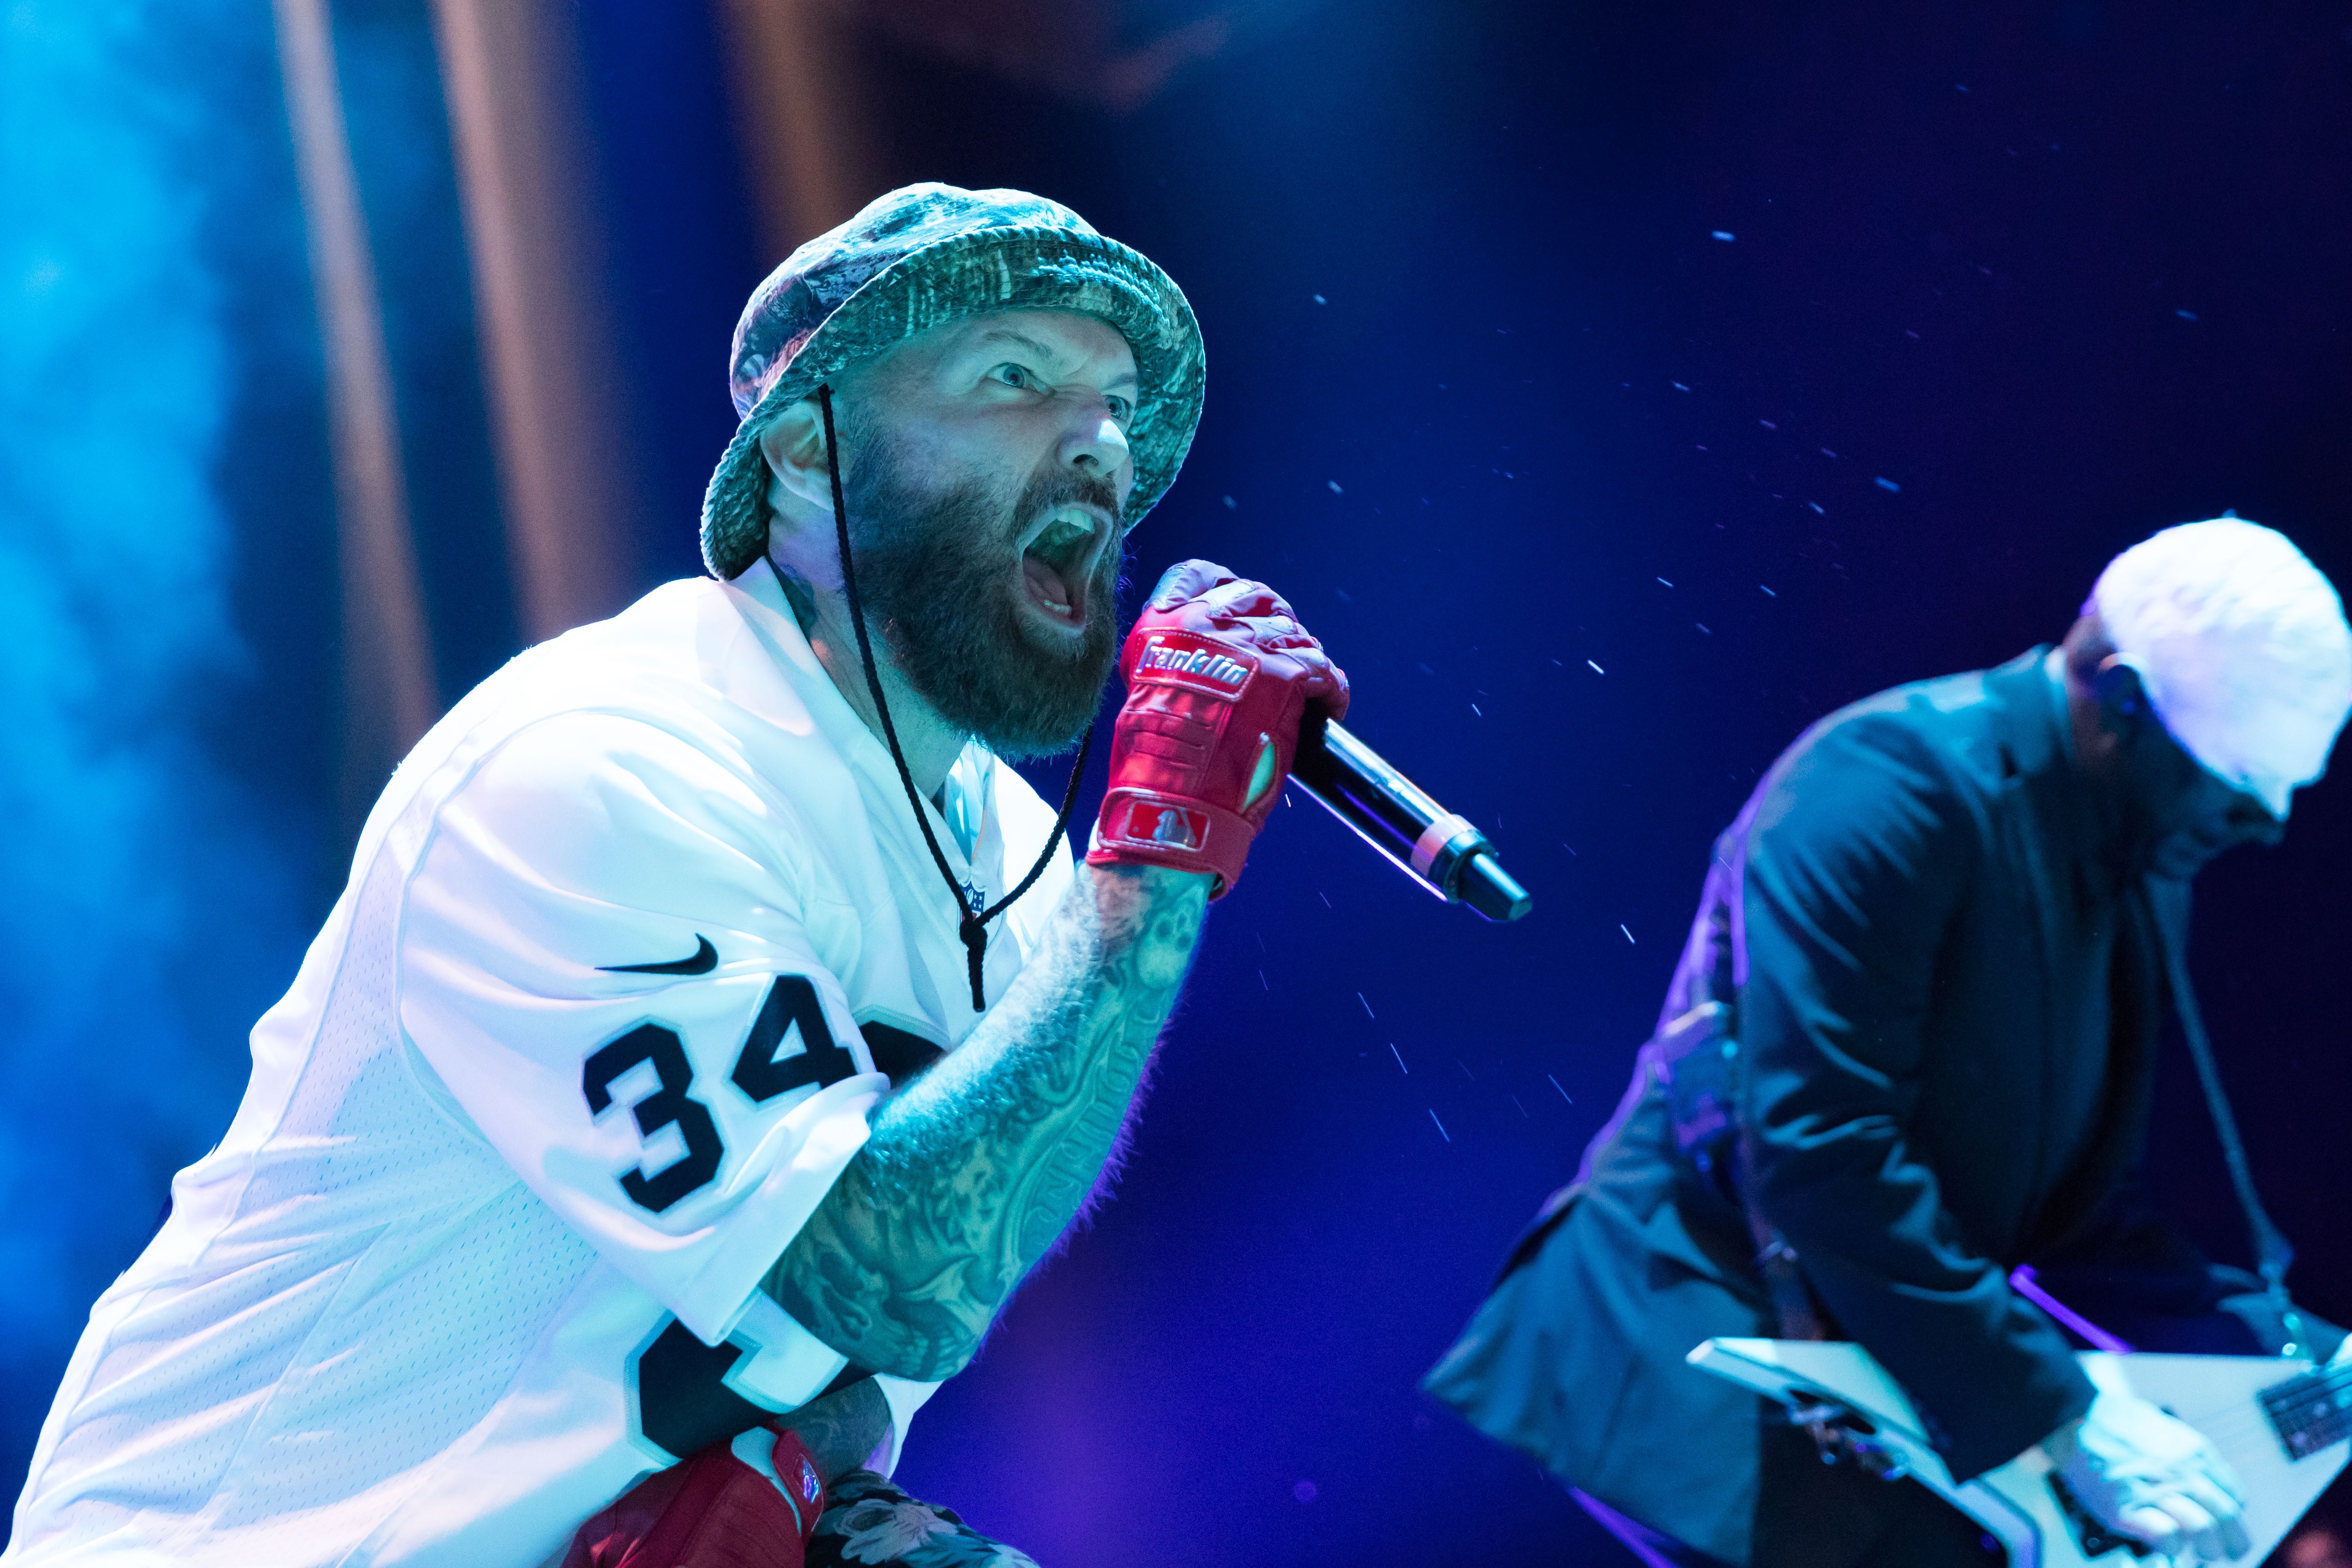 ICP’s Shaggy 2 Dope Attempts to Dropkick Fred Durst During Limp Bizkit